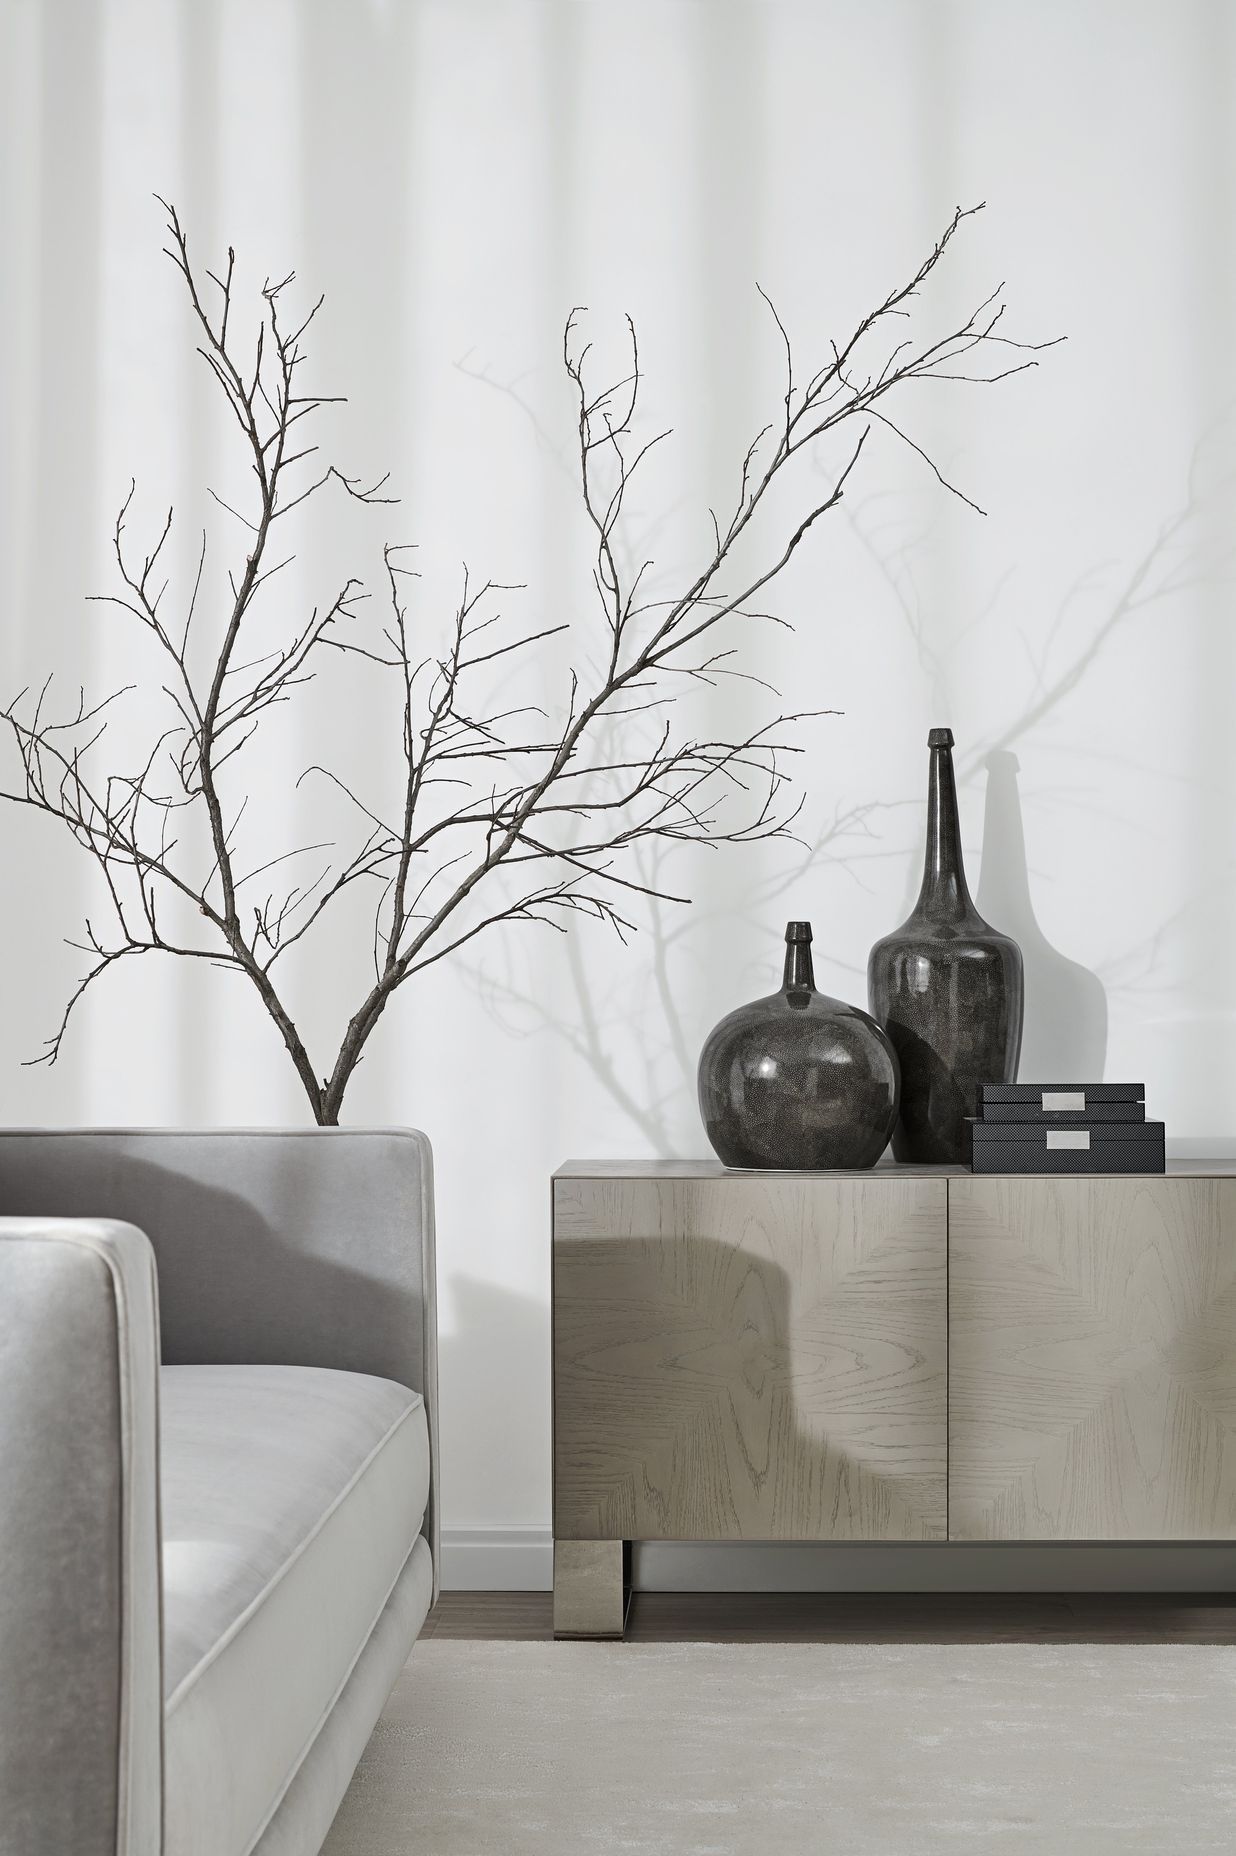 With an ash oak veneer, the Kelly Hoppen Picasso Credenza has been designed to sit beautifully in any interior.